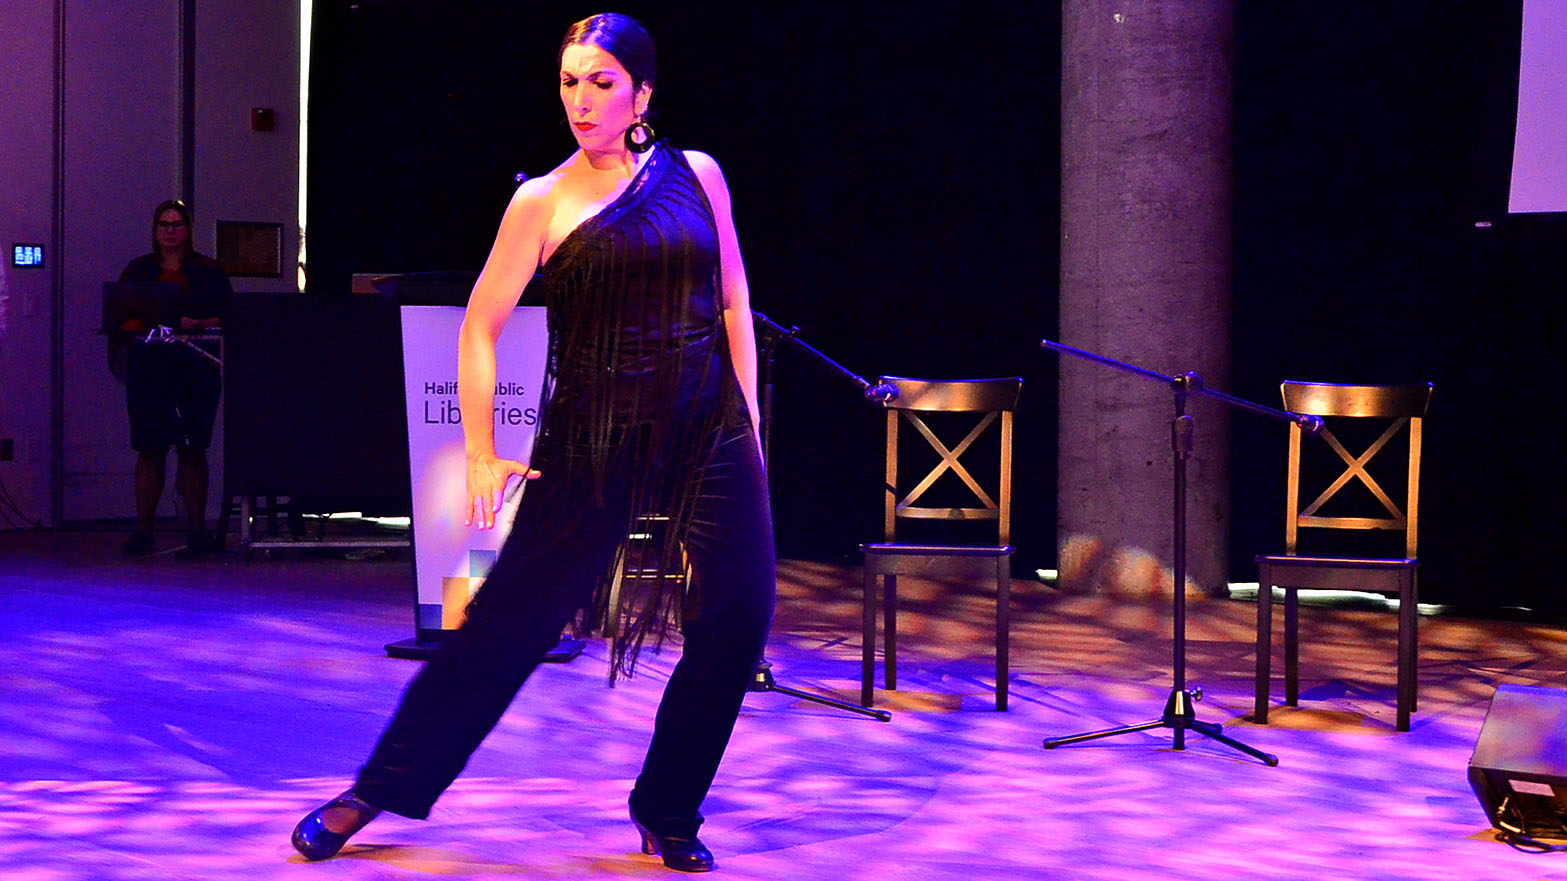 A lady dressed in a black jumpsuit with fringes dances to flamenco music.